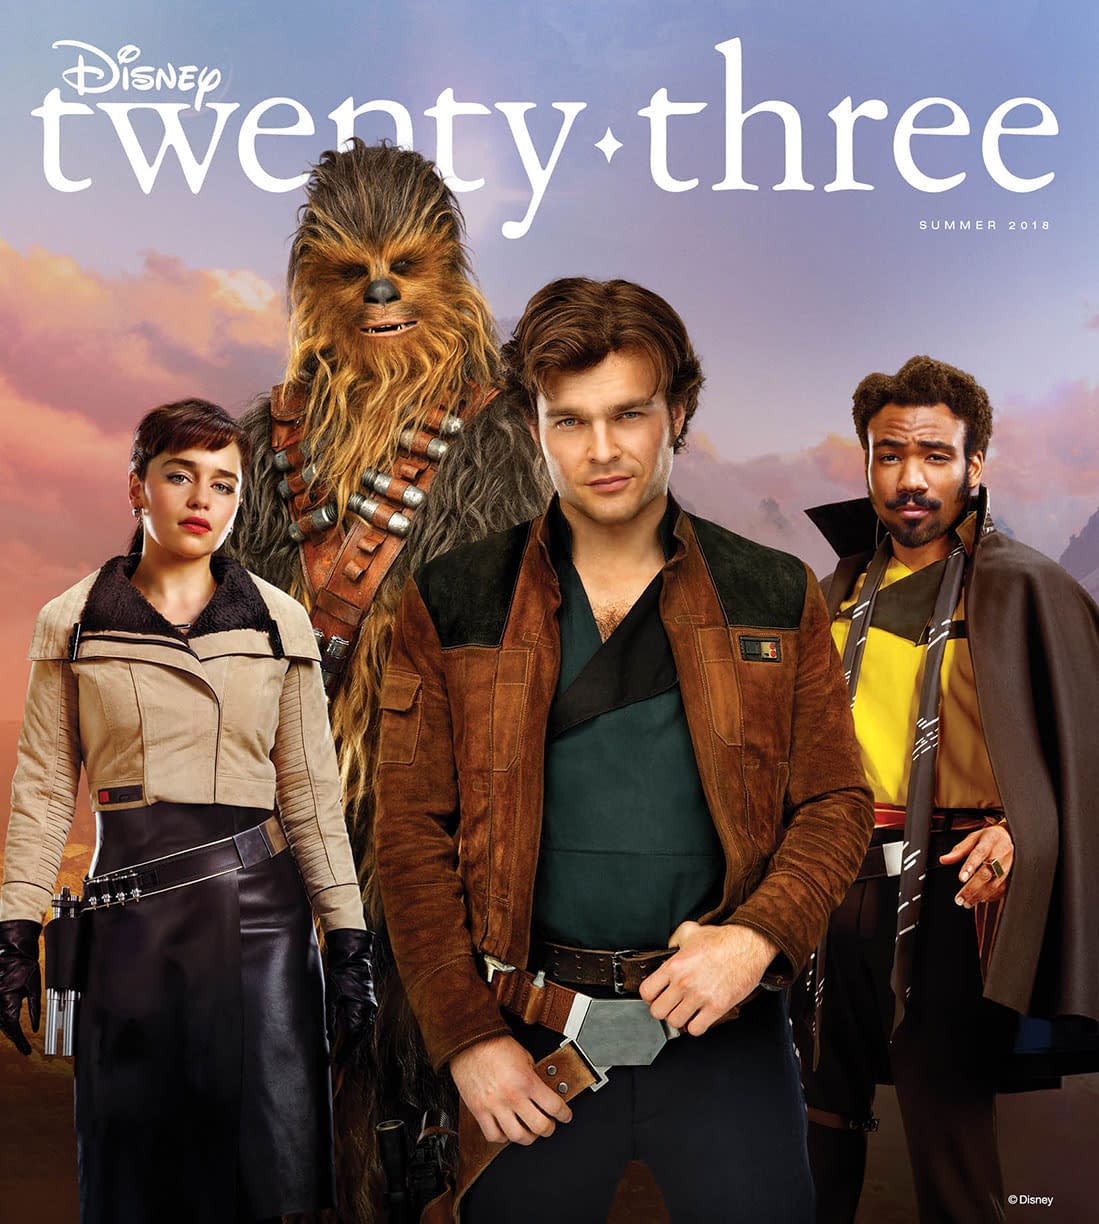 The Cast of Solo: A Star Wars Story Strikes a Pose on the Cover of Disney's Twenty-Three